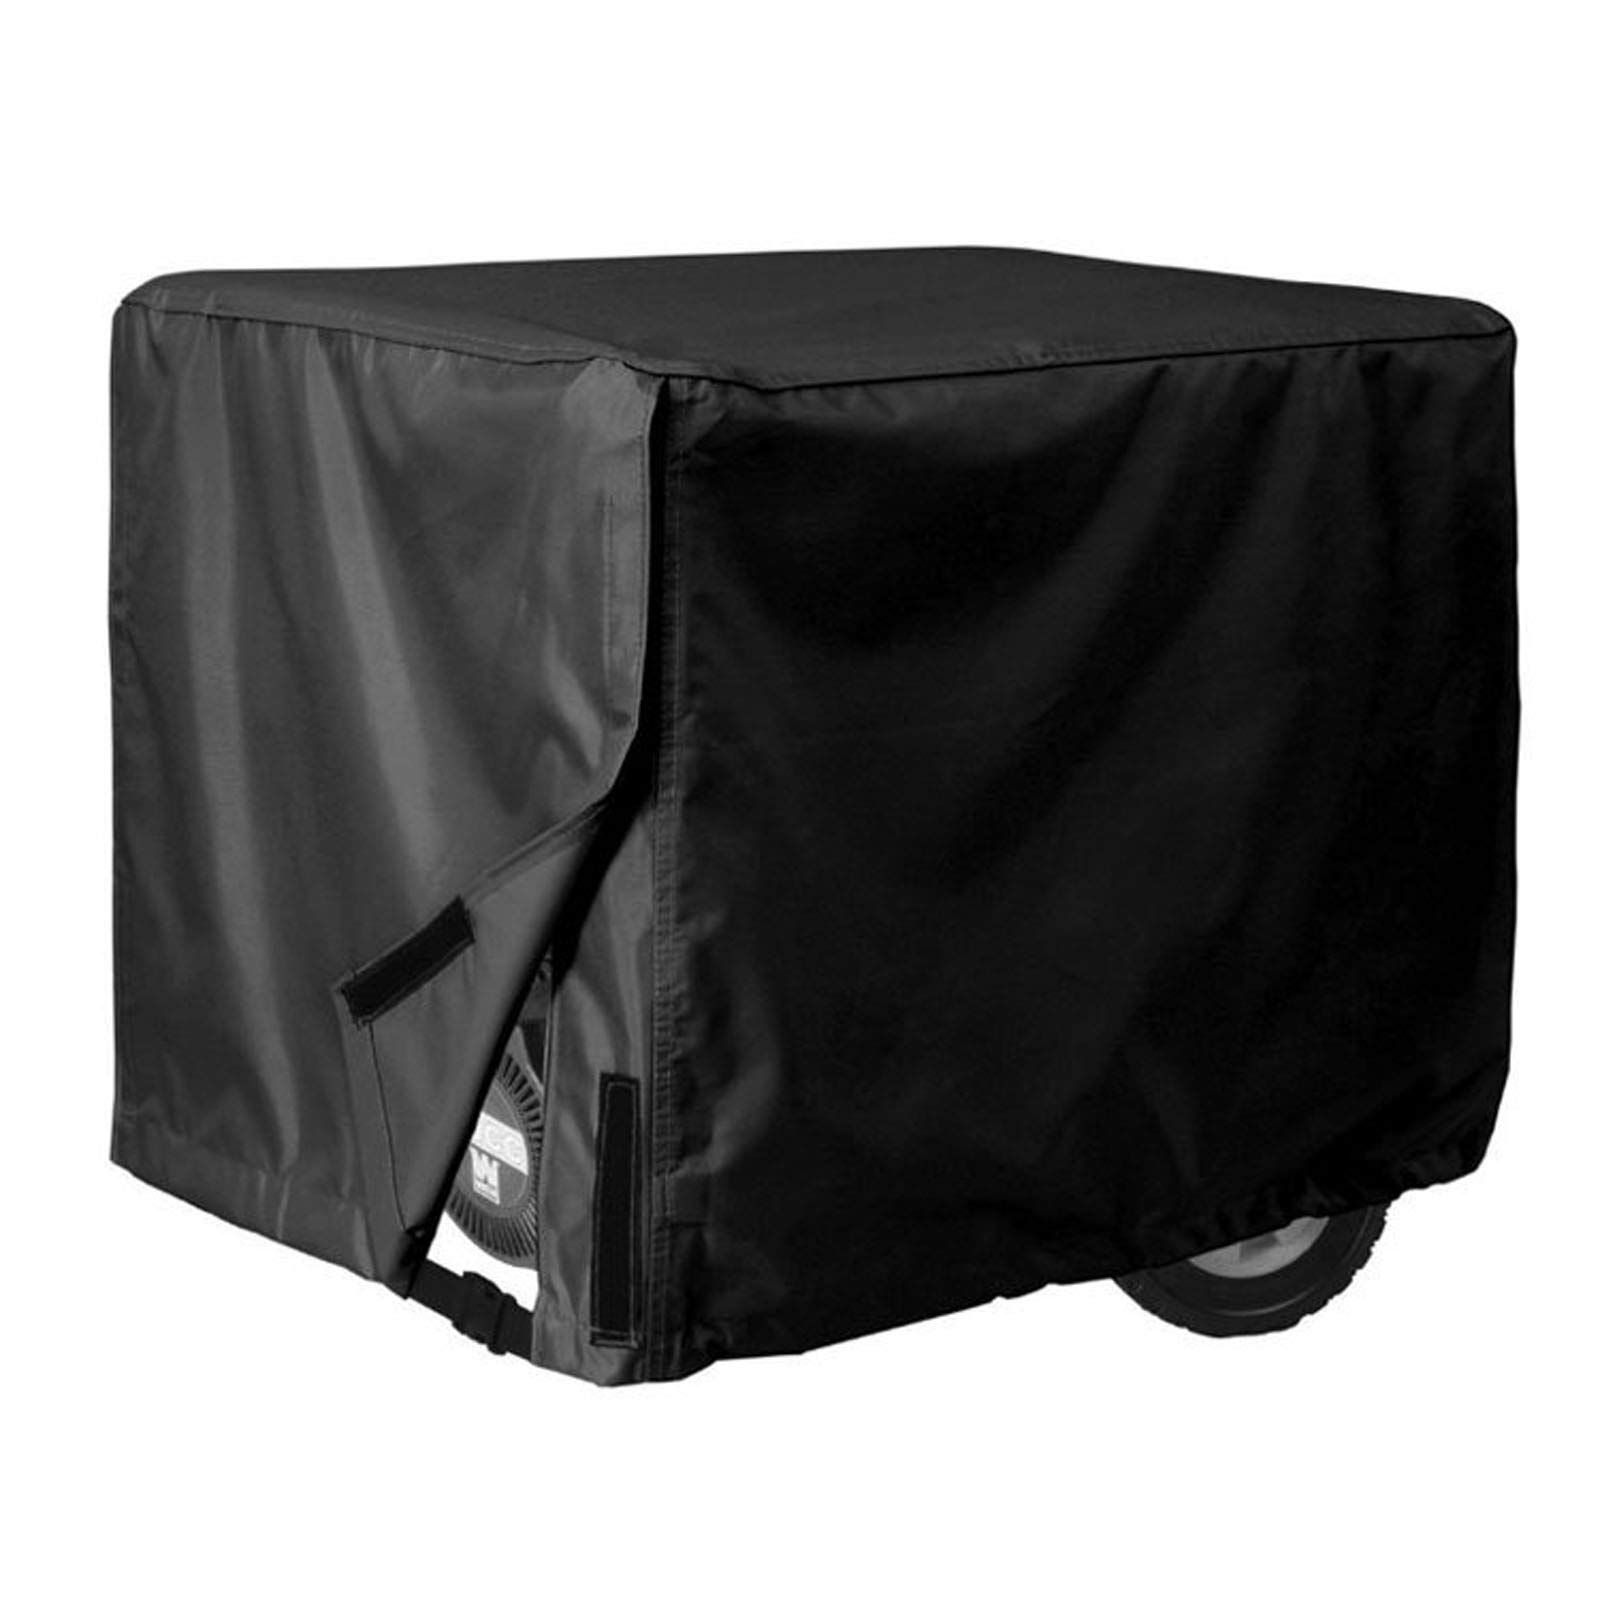 Portable Generator Covers While Running for Square 600D Polyester Universal Waterproof Generator Cover for Outside Generator Running Cover(26inX20inX20in)